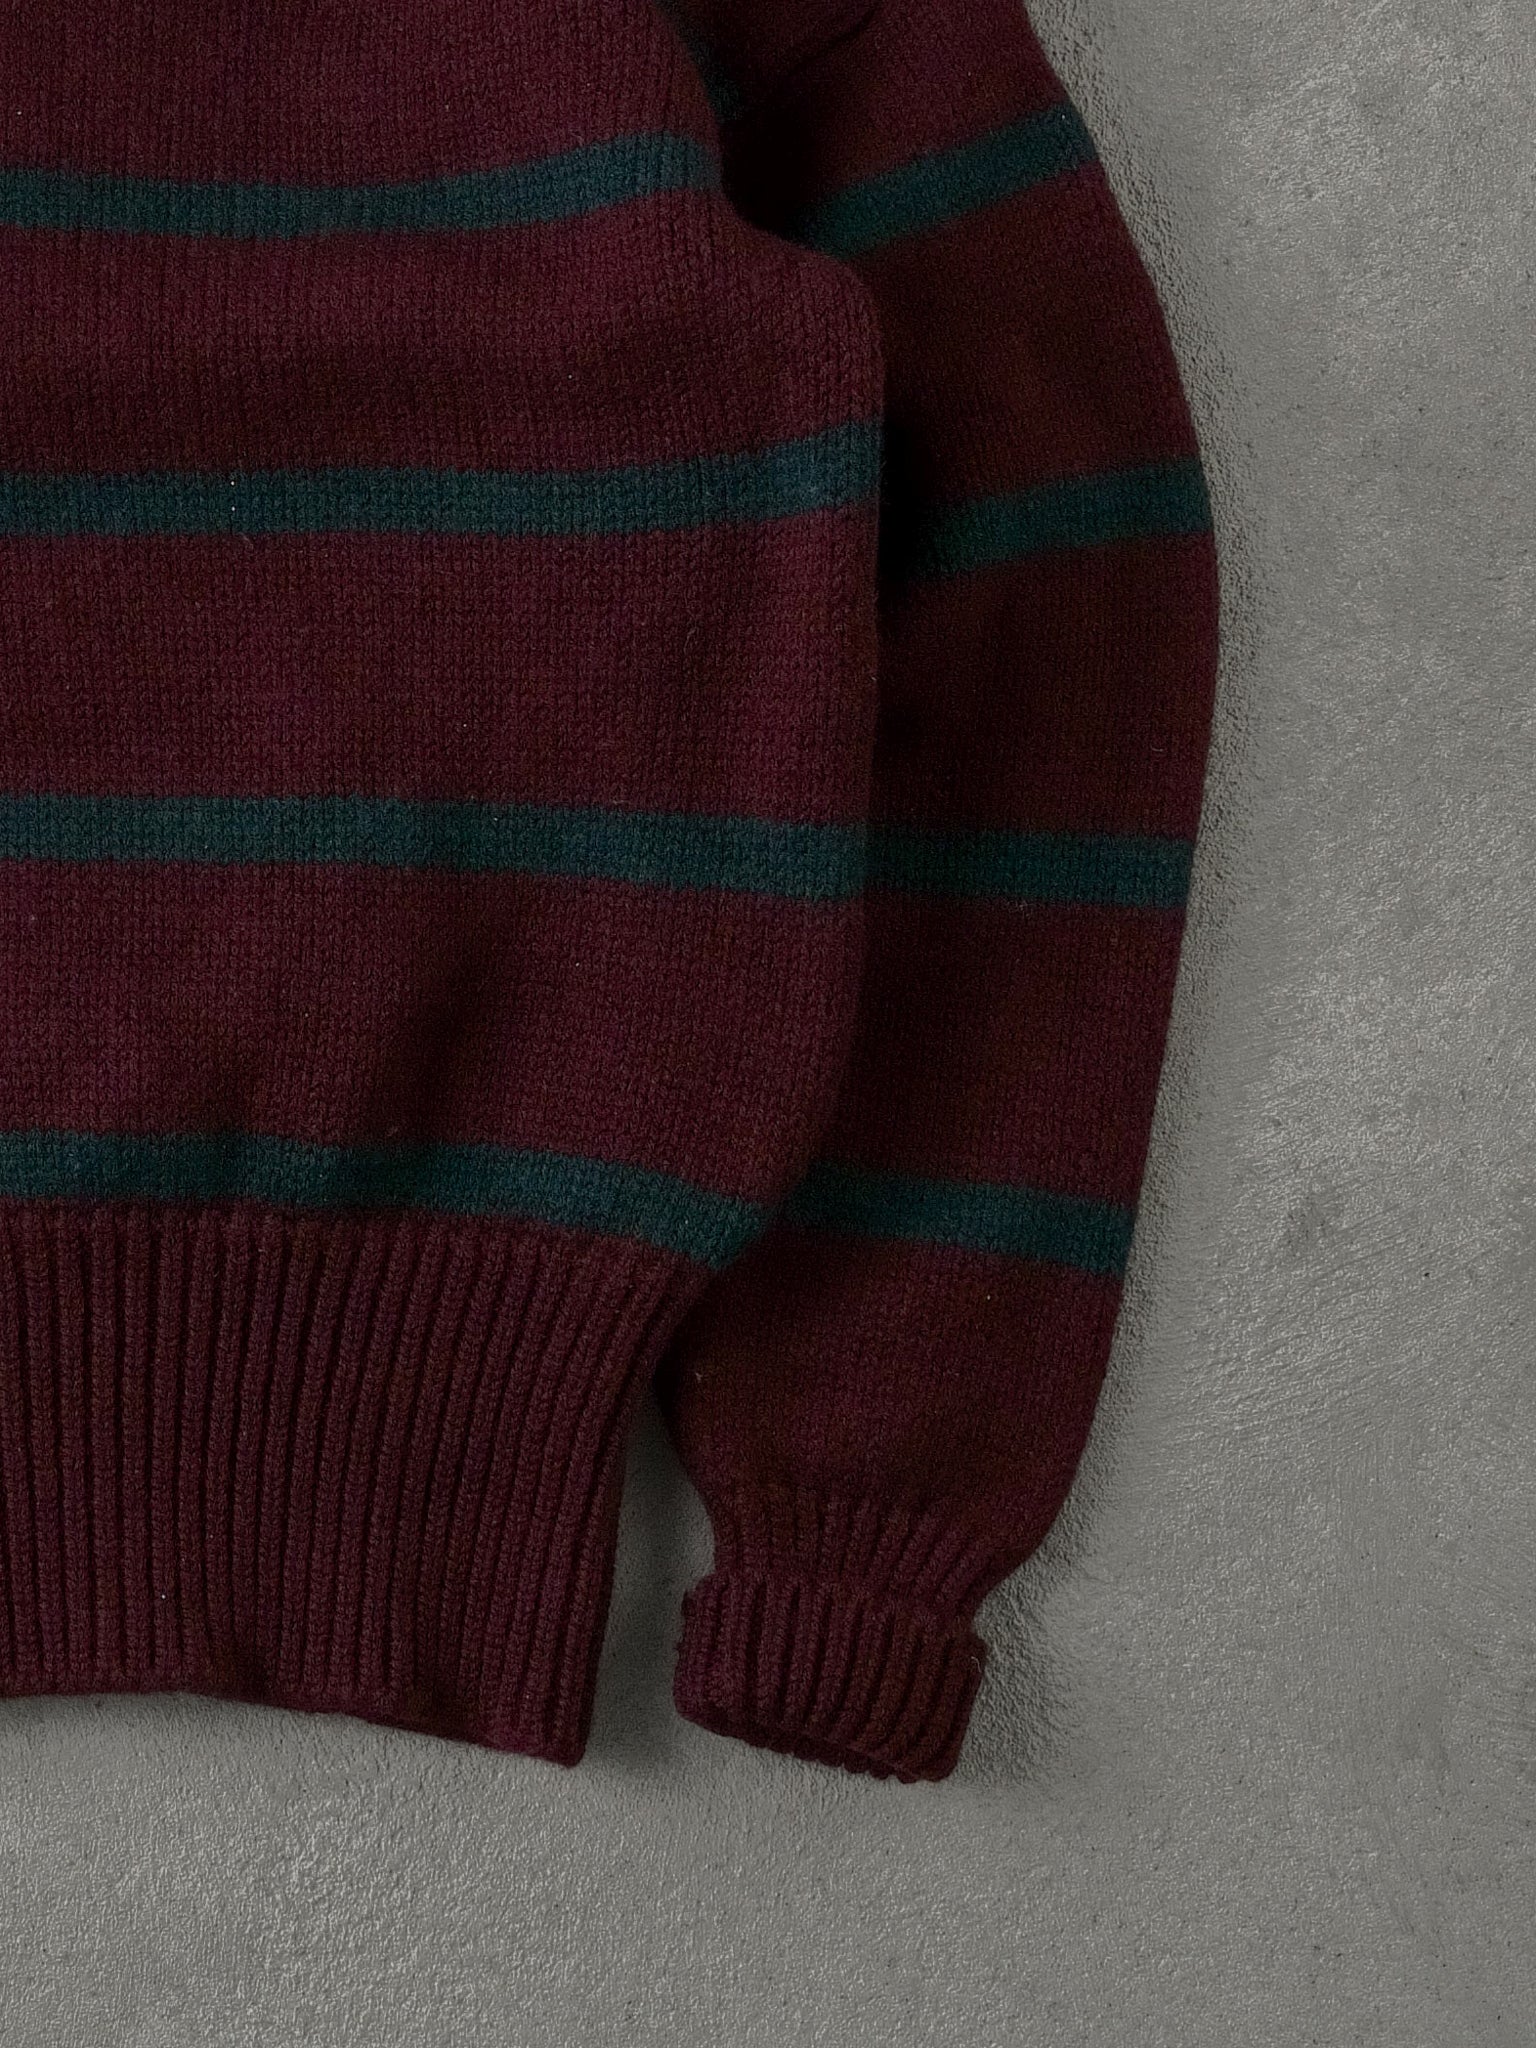 Vintage 90s Maroon Polo By Ralph Lauren Striped Wool Crewneck (M)